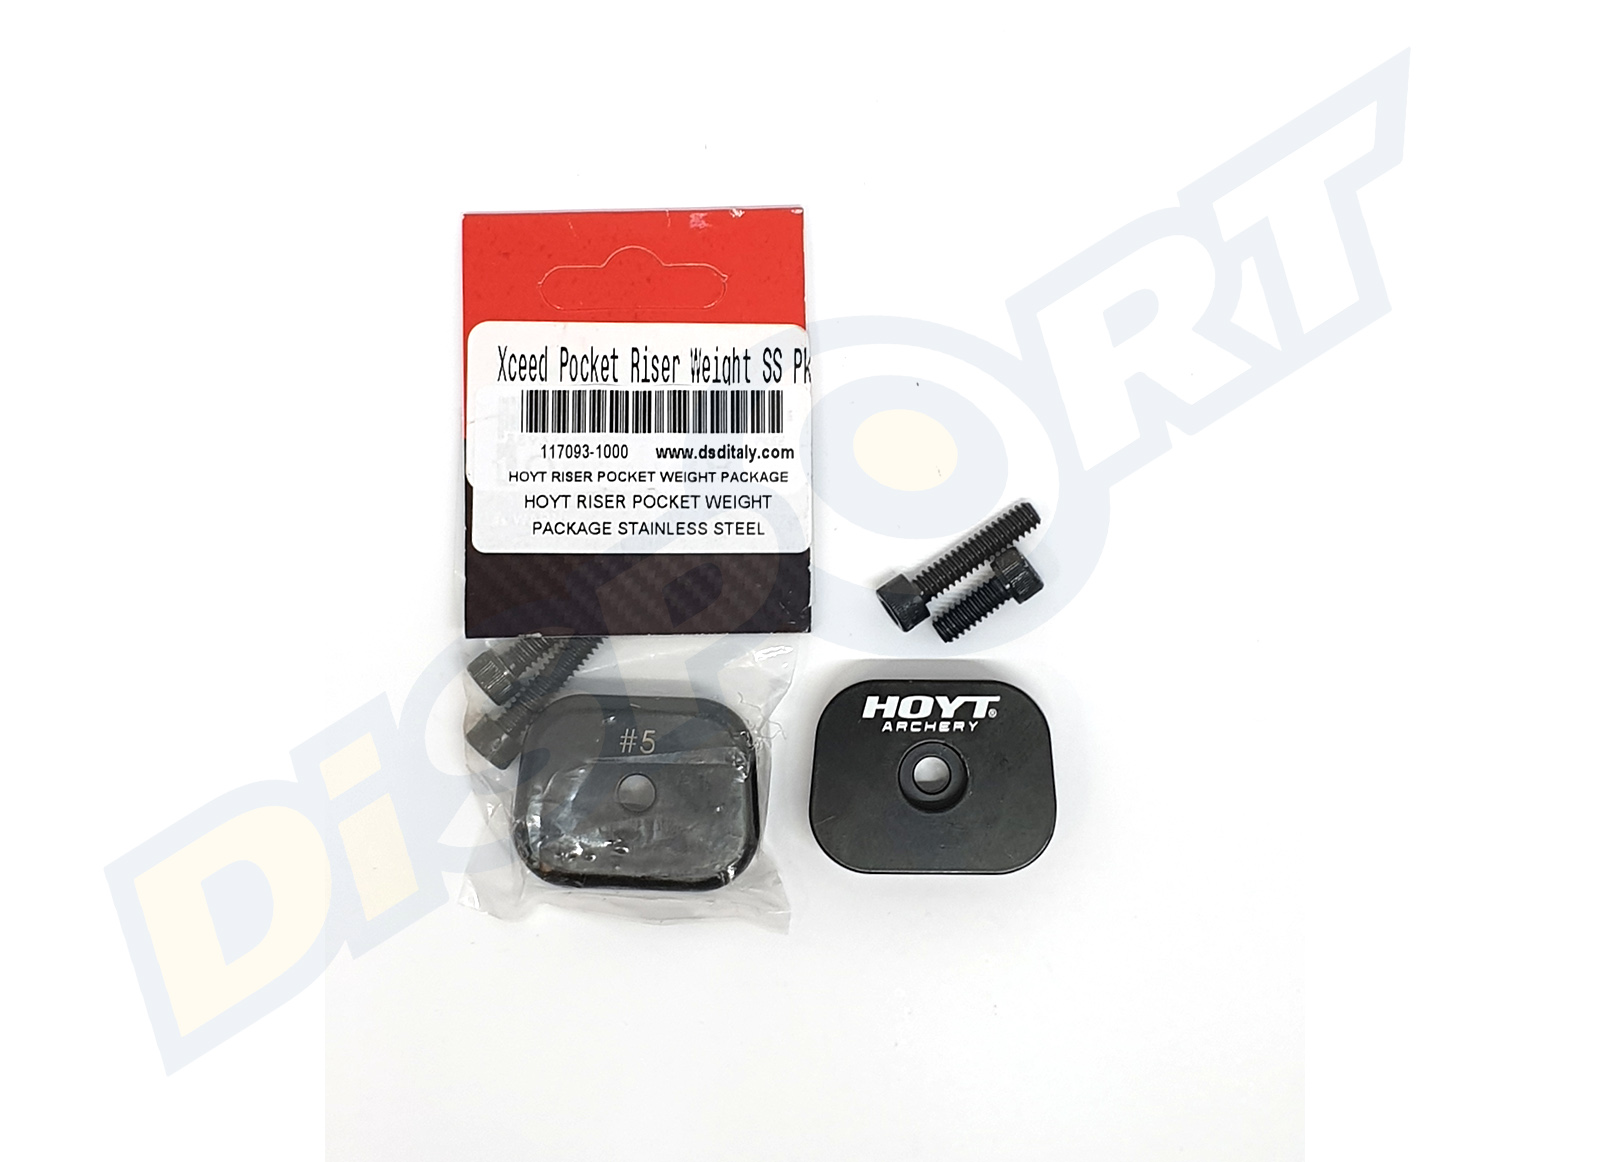 HOYT RISER POCKET WEIGHT PACKAGE STAINLESS STEEL